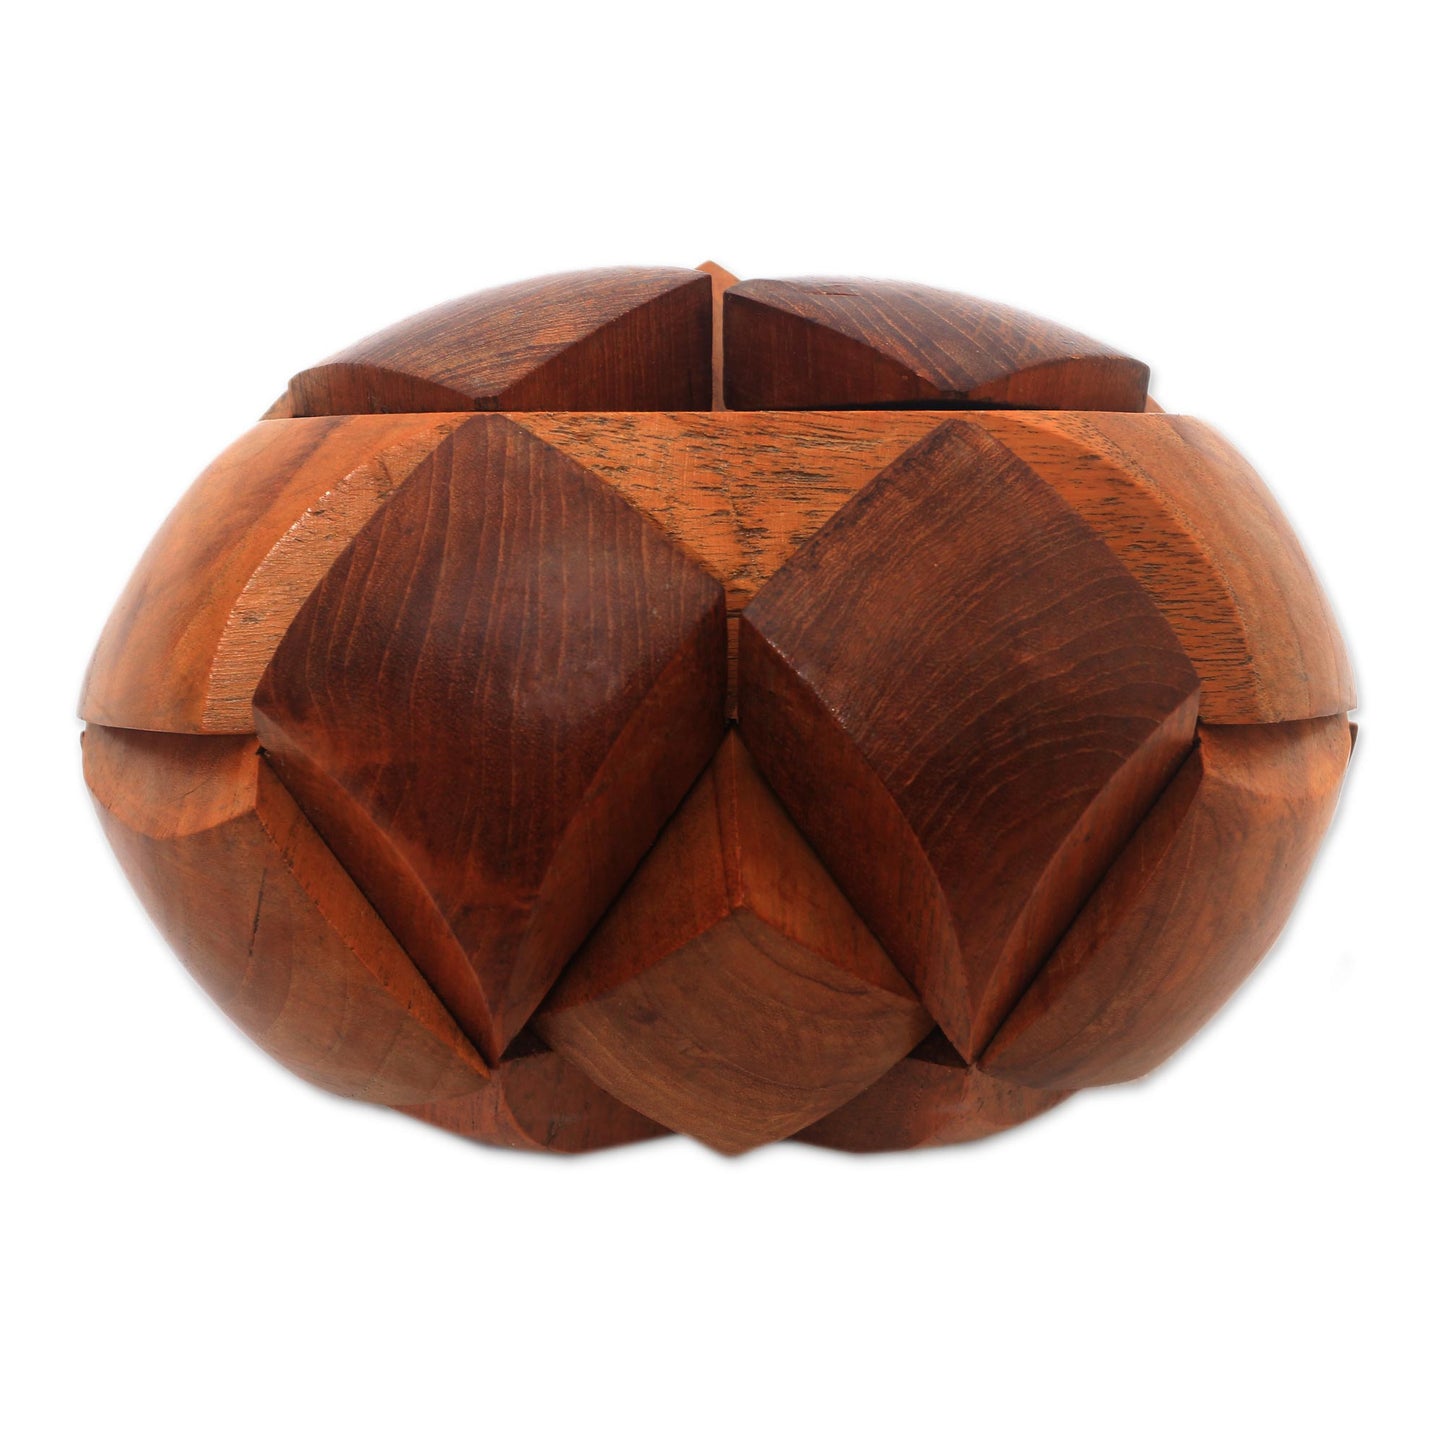 Magical Illusion Handcarved Teak Wood Puzzle from Java